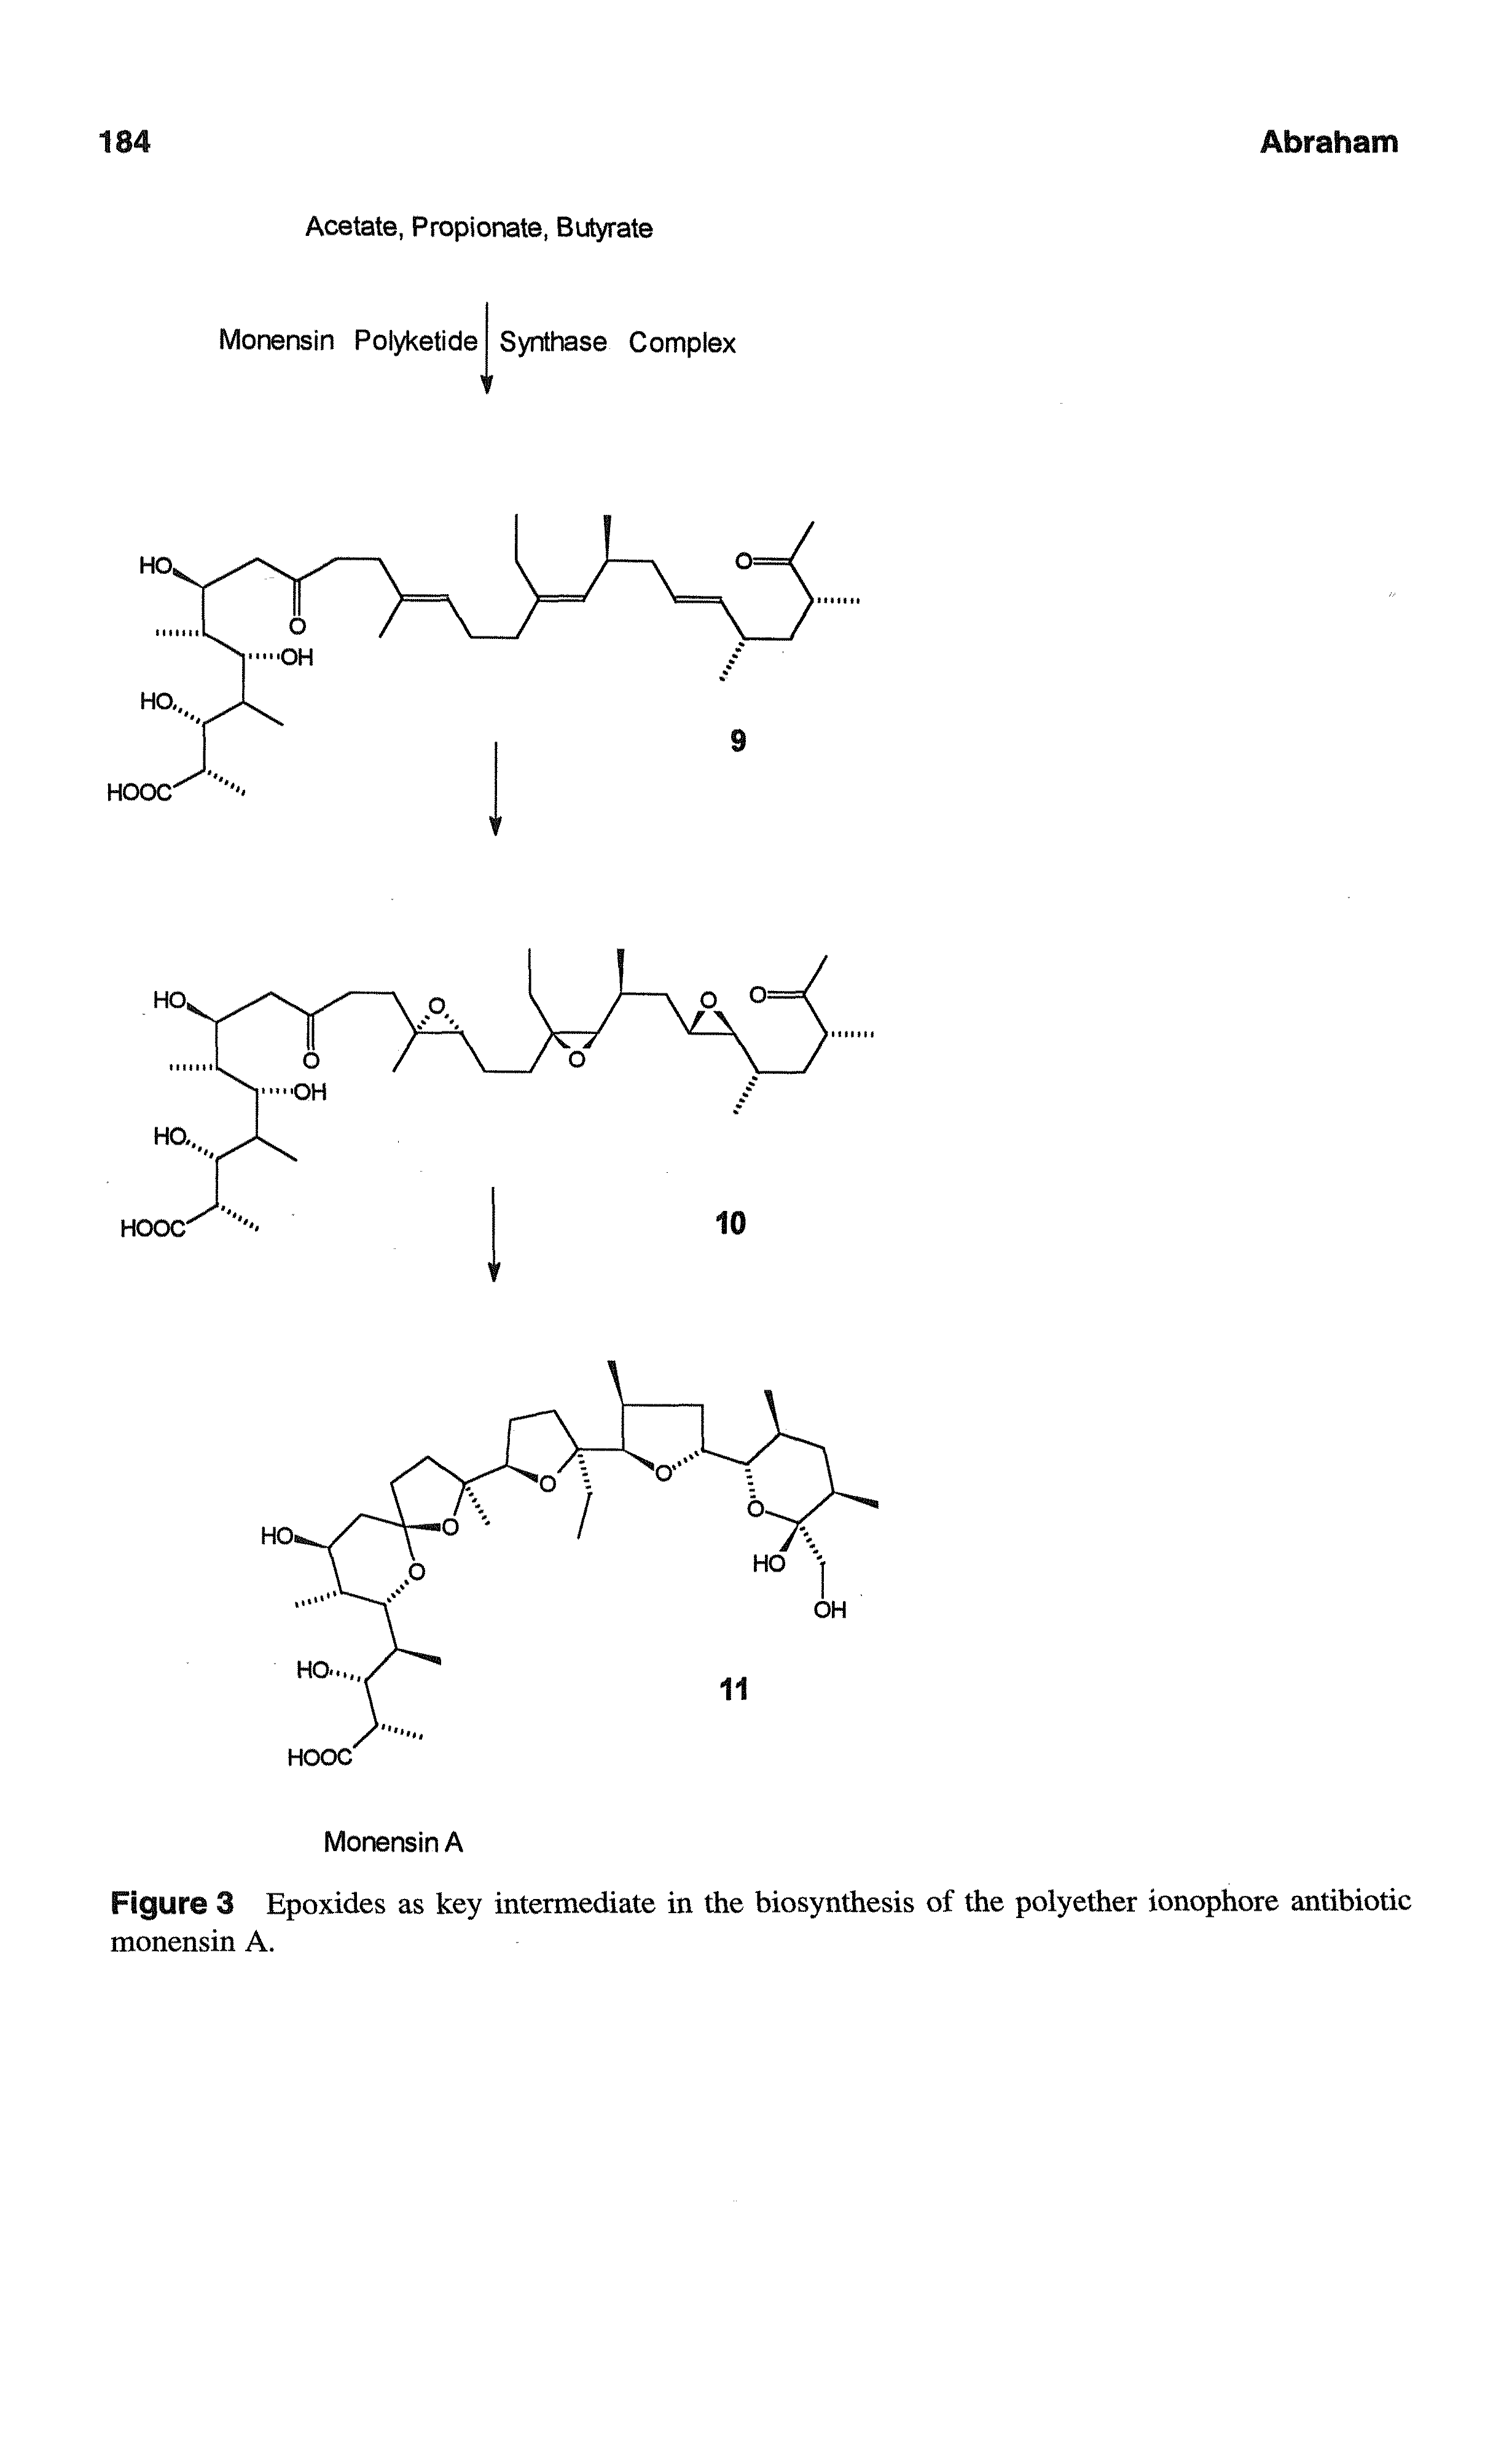 Figure 3 Epoxides as key intermediate in the biosynthesis of the polyether ionophore antibiotic monensin A.